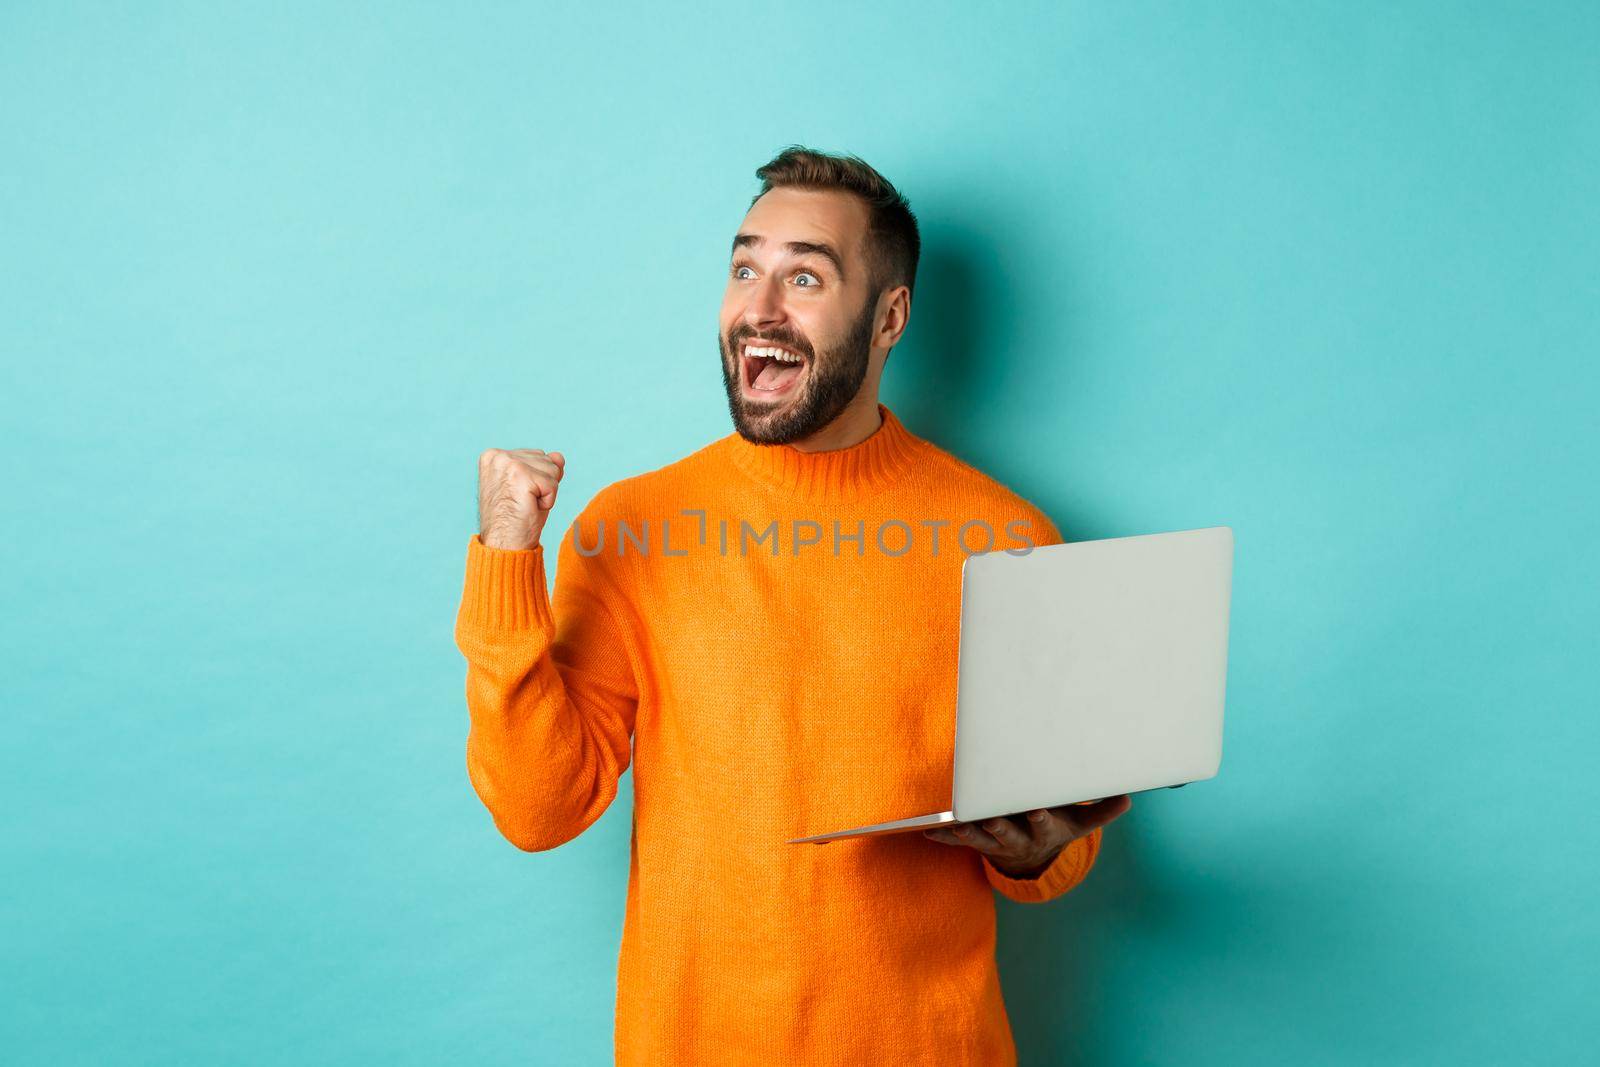 Freelance and technology concept. Lucky man winner celebrating, winning online, showing fist pump and holding laptop, looking at upper left corner.